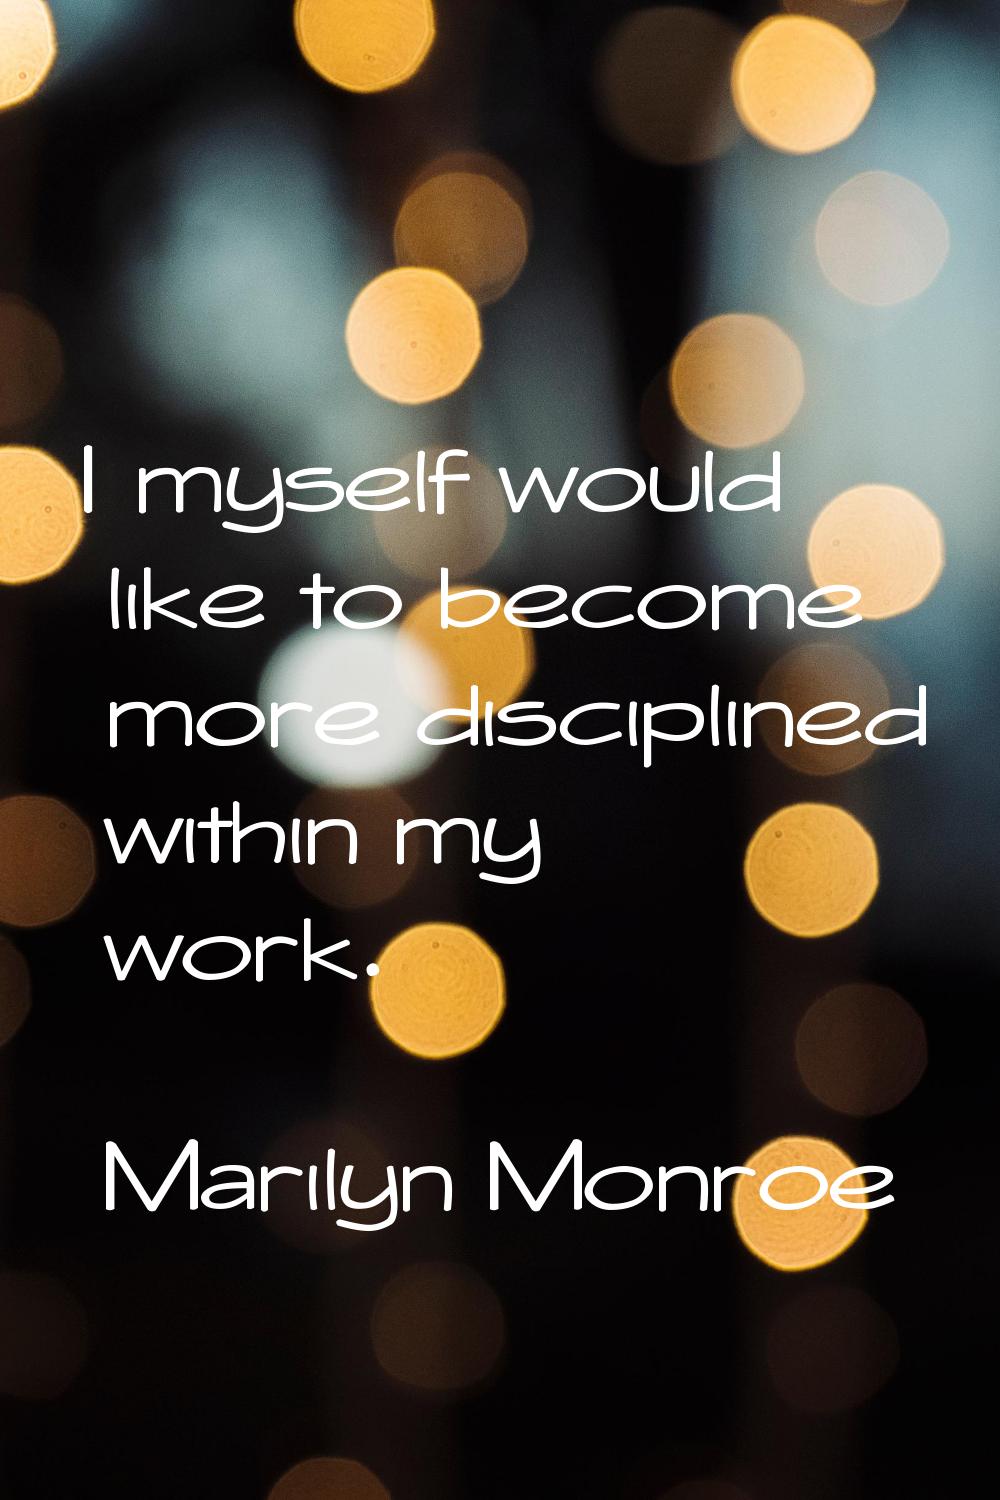 I myself would like to become more disciplined within my work.